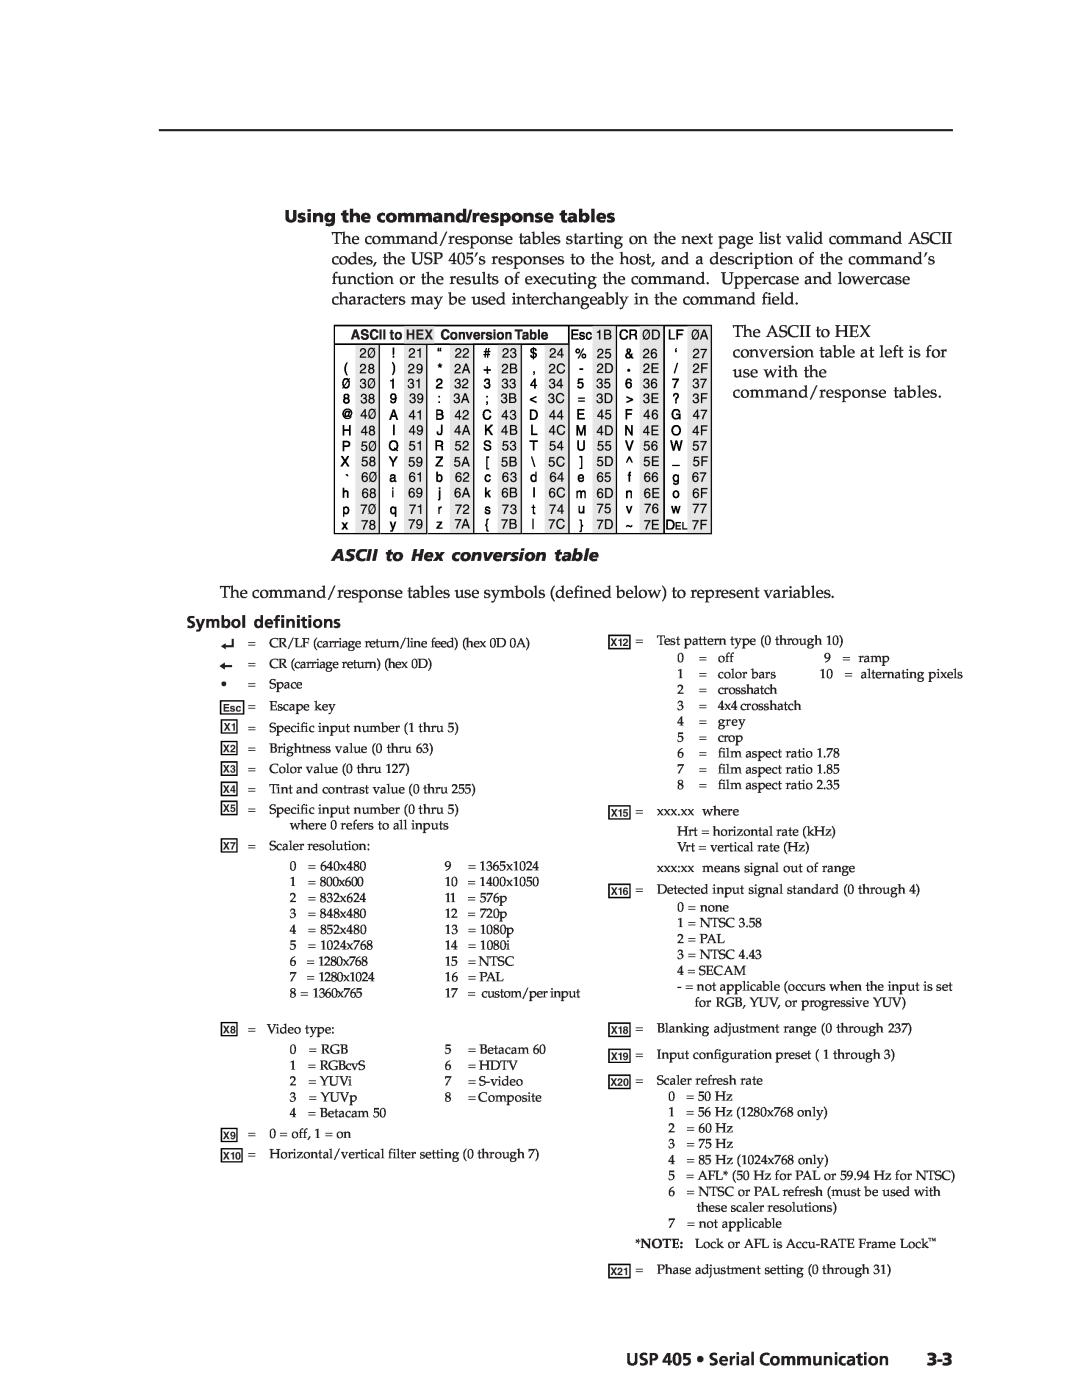 Extron electronic USP 405 manual Using the command/response tables, ASCII to Hex conversion table, Symbol definitions 